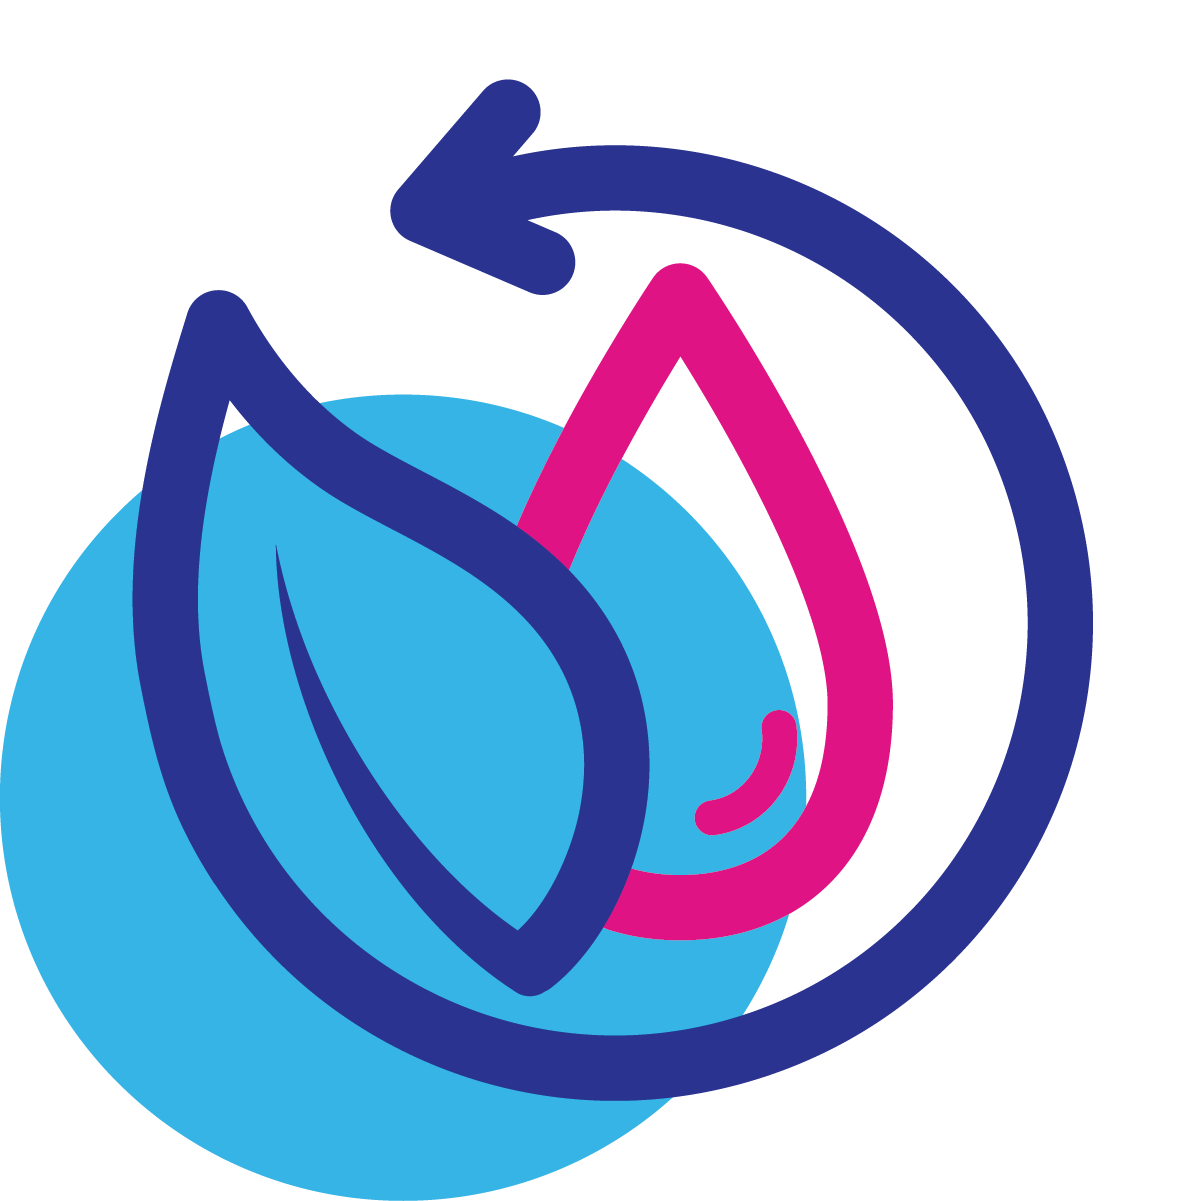 A purple leaf with a stem that turns into an arrow encircling a magenta water droplet, over a blue circle